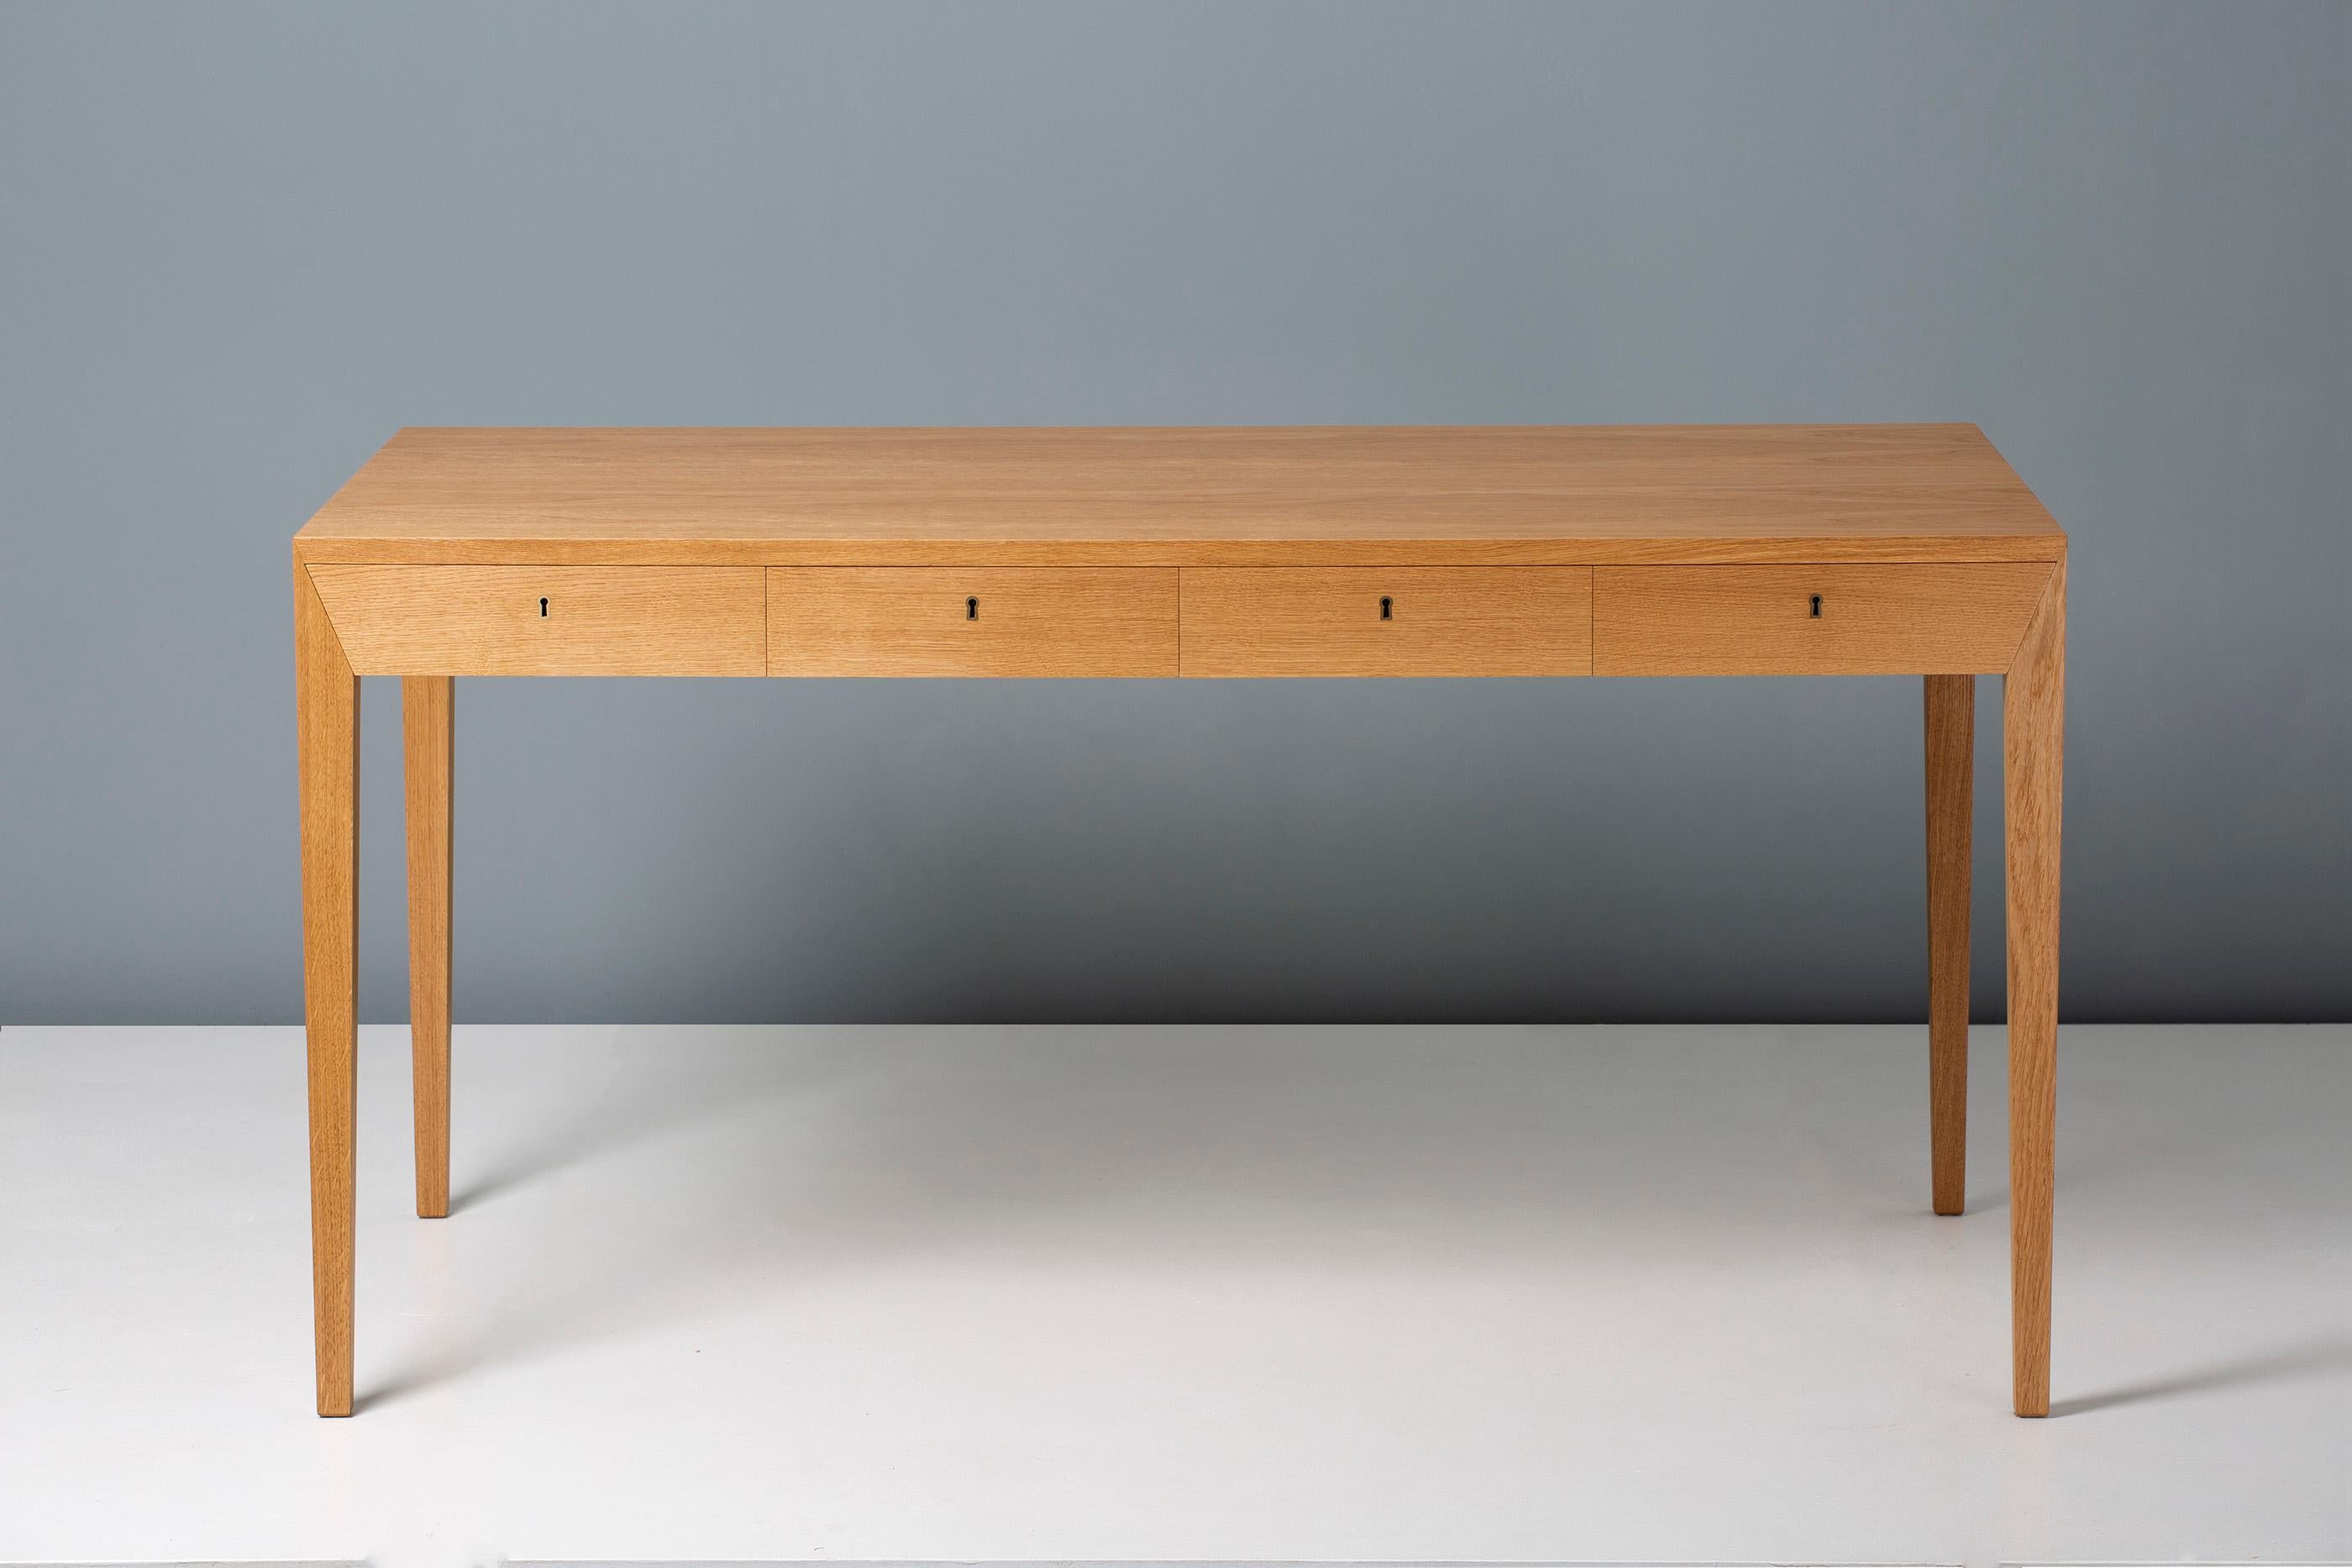 The iconic Model 36 desk from Danish designer Severin Hansen was designed in 1958 and exhibited at the annual Cabinetmaker’s Guild Exhibition in Copenhagen in the same year. It went on to become one of the most sought-after and recognised desks from